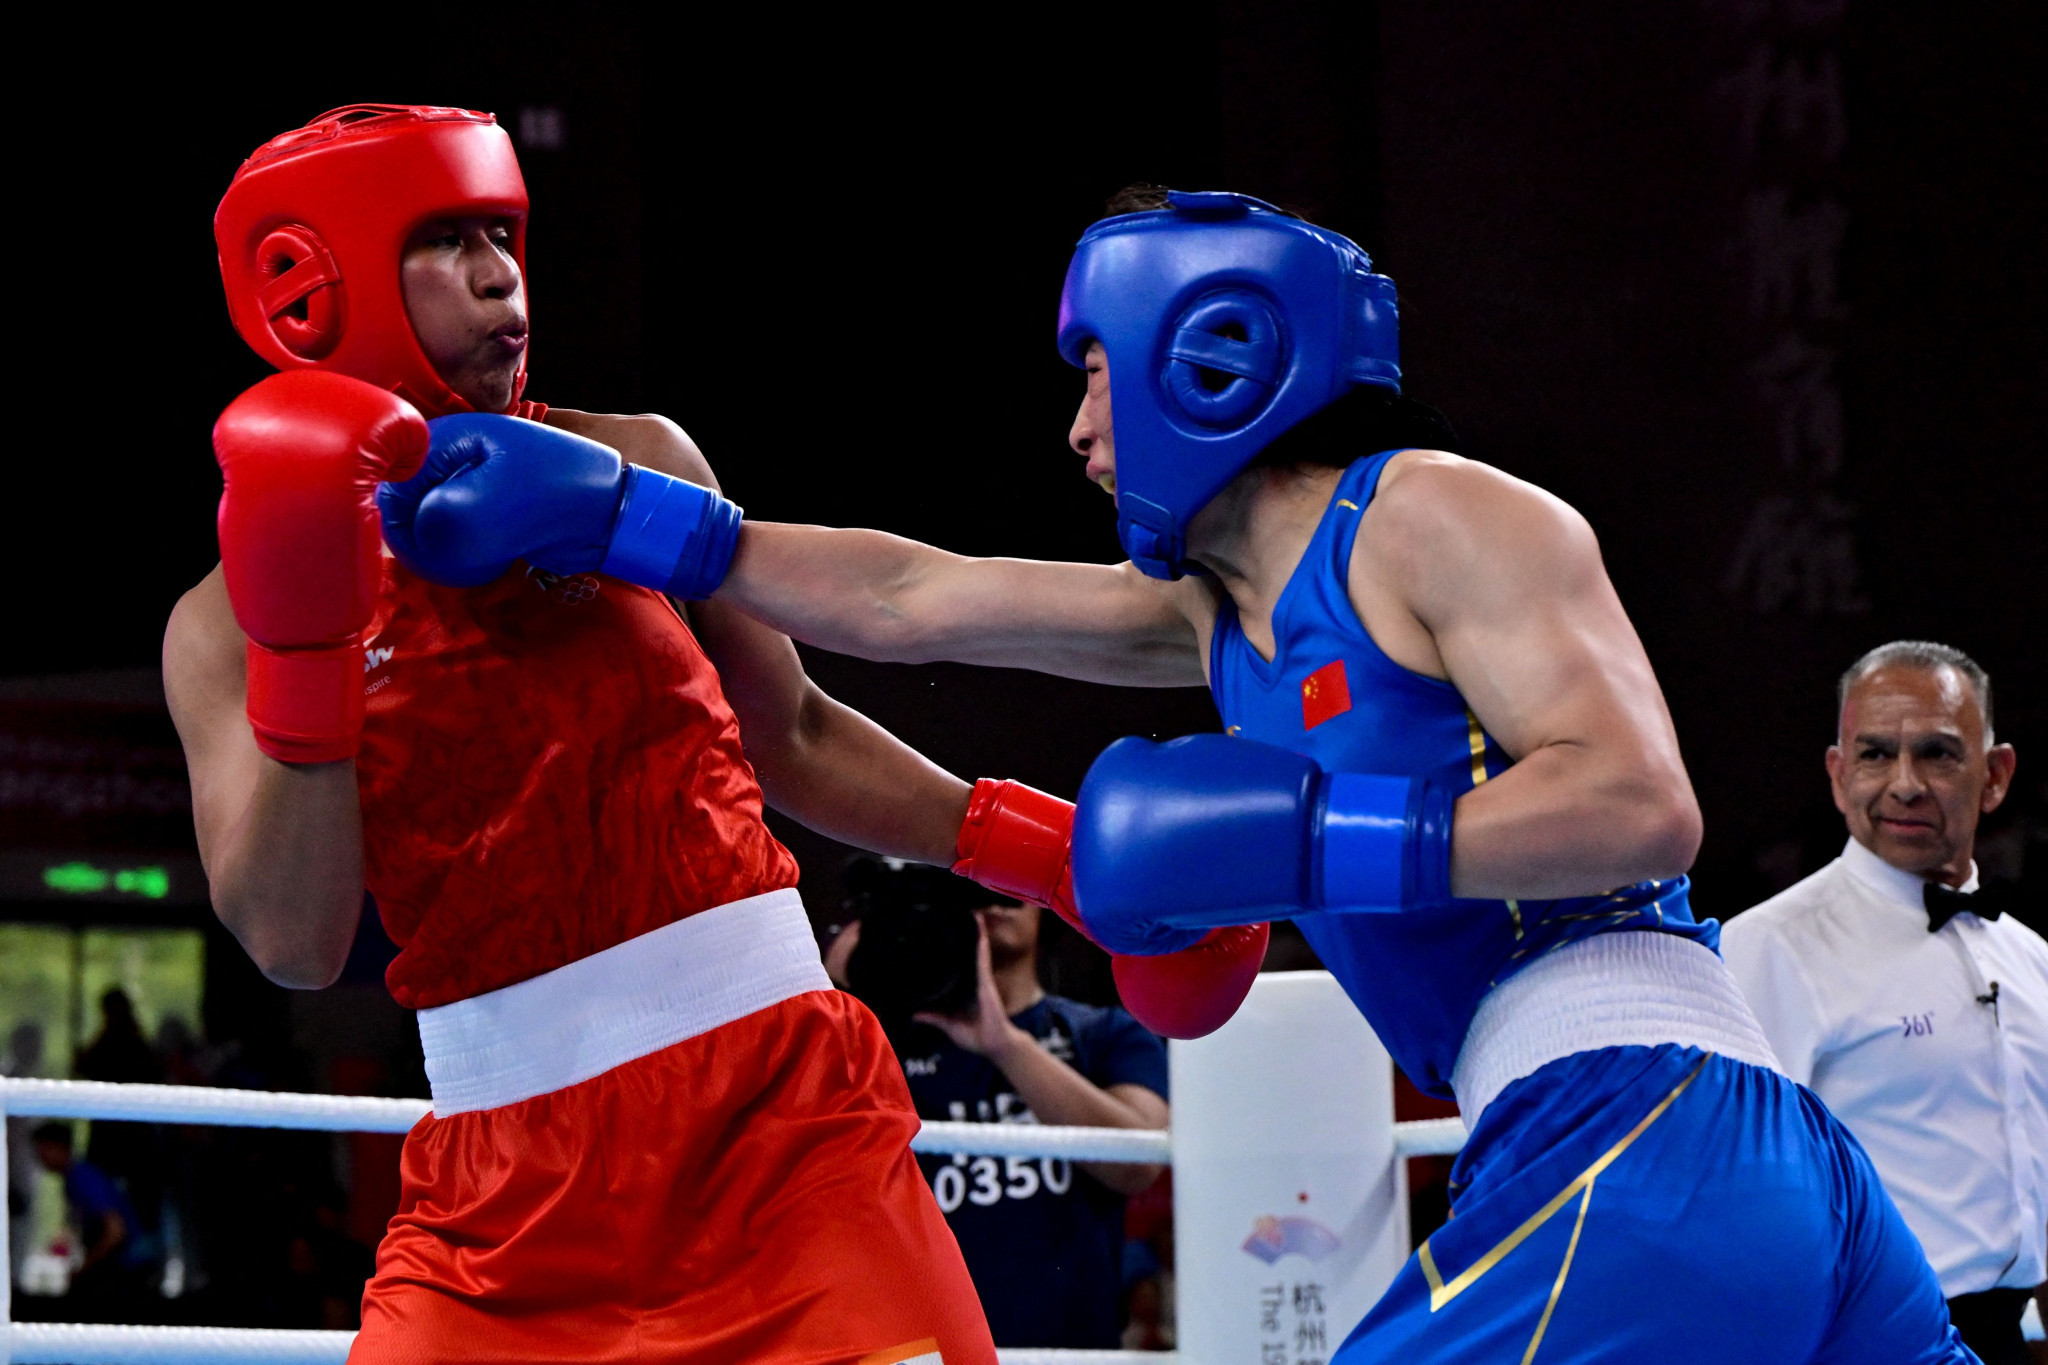 World champion Lovlina Borgohain of India, left, suffered a shock defeat in the women's 66-75kg boxing final to China's Li Qian ©Getty Images